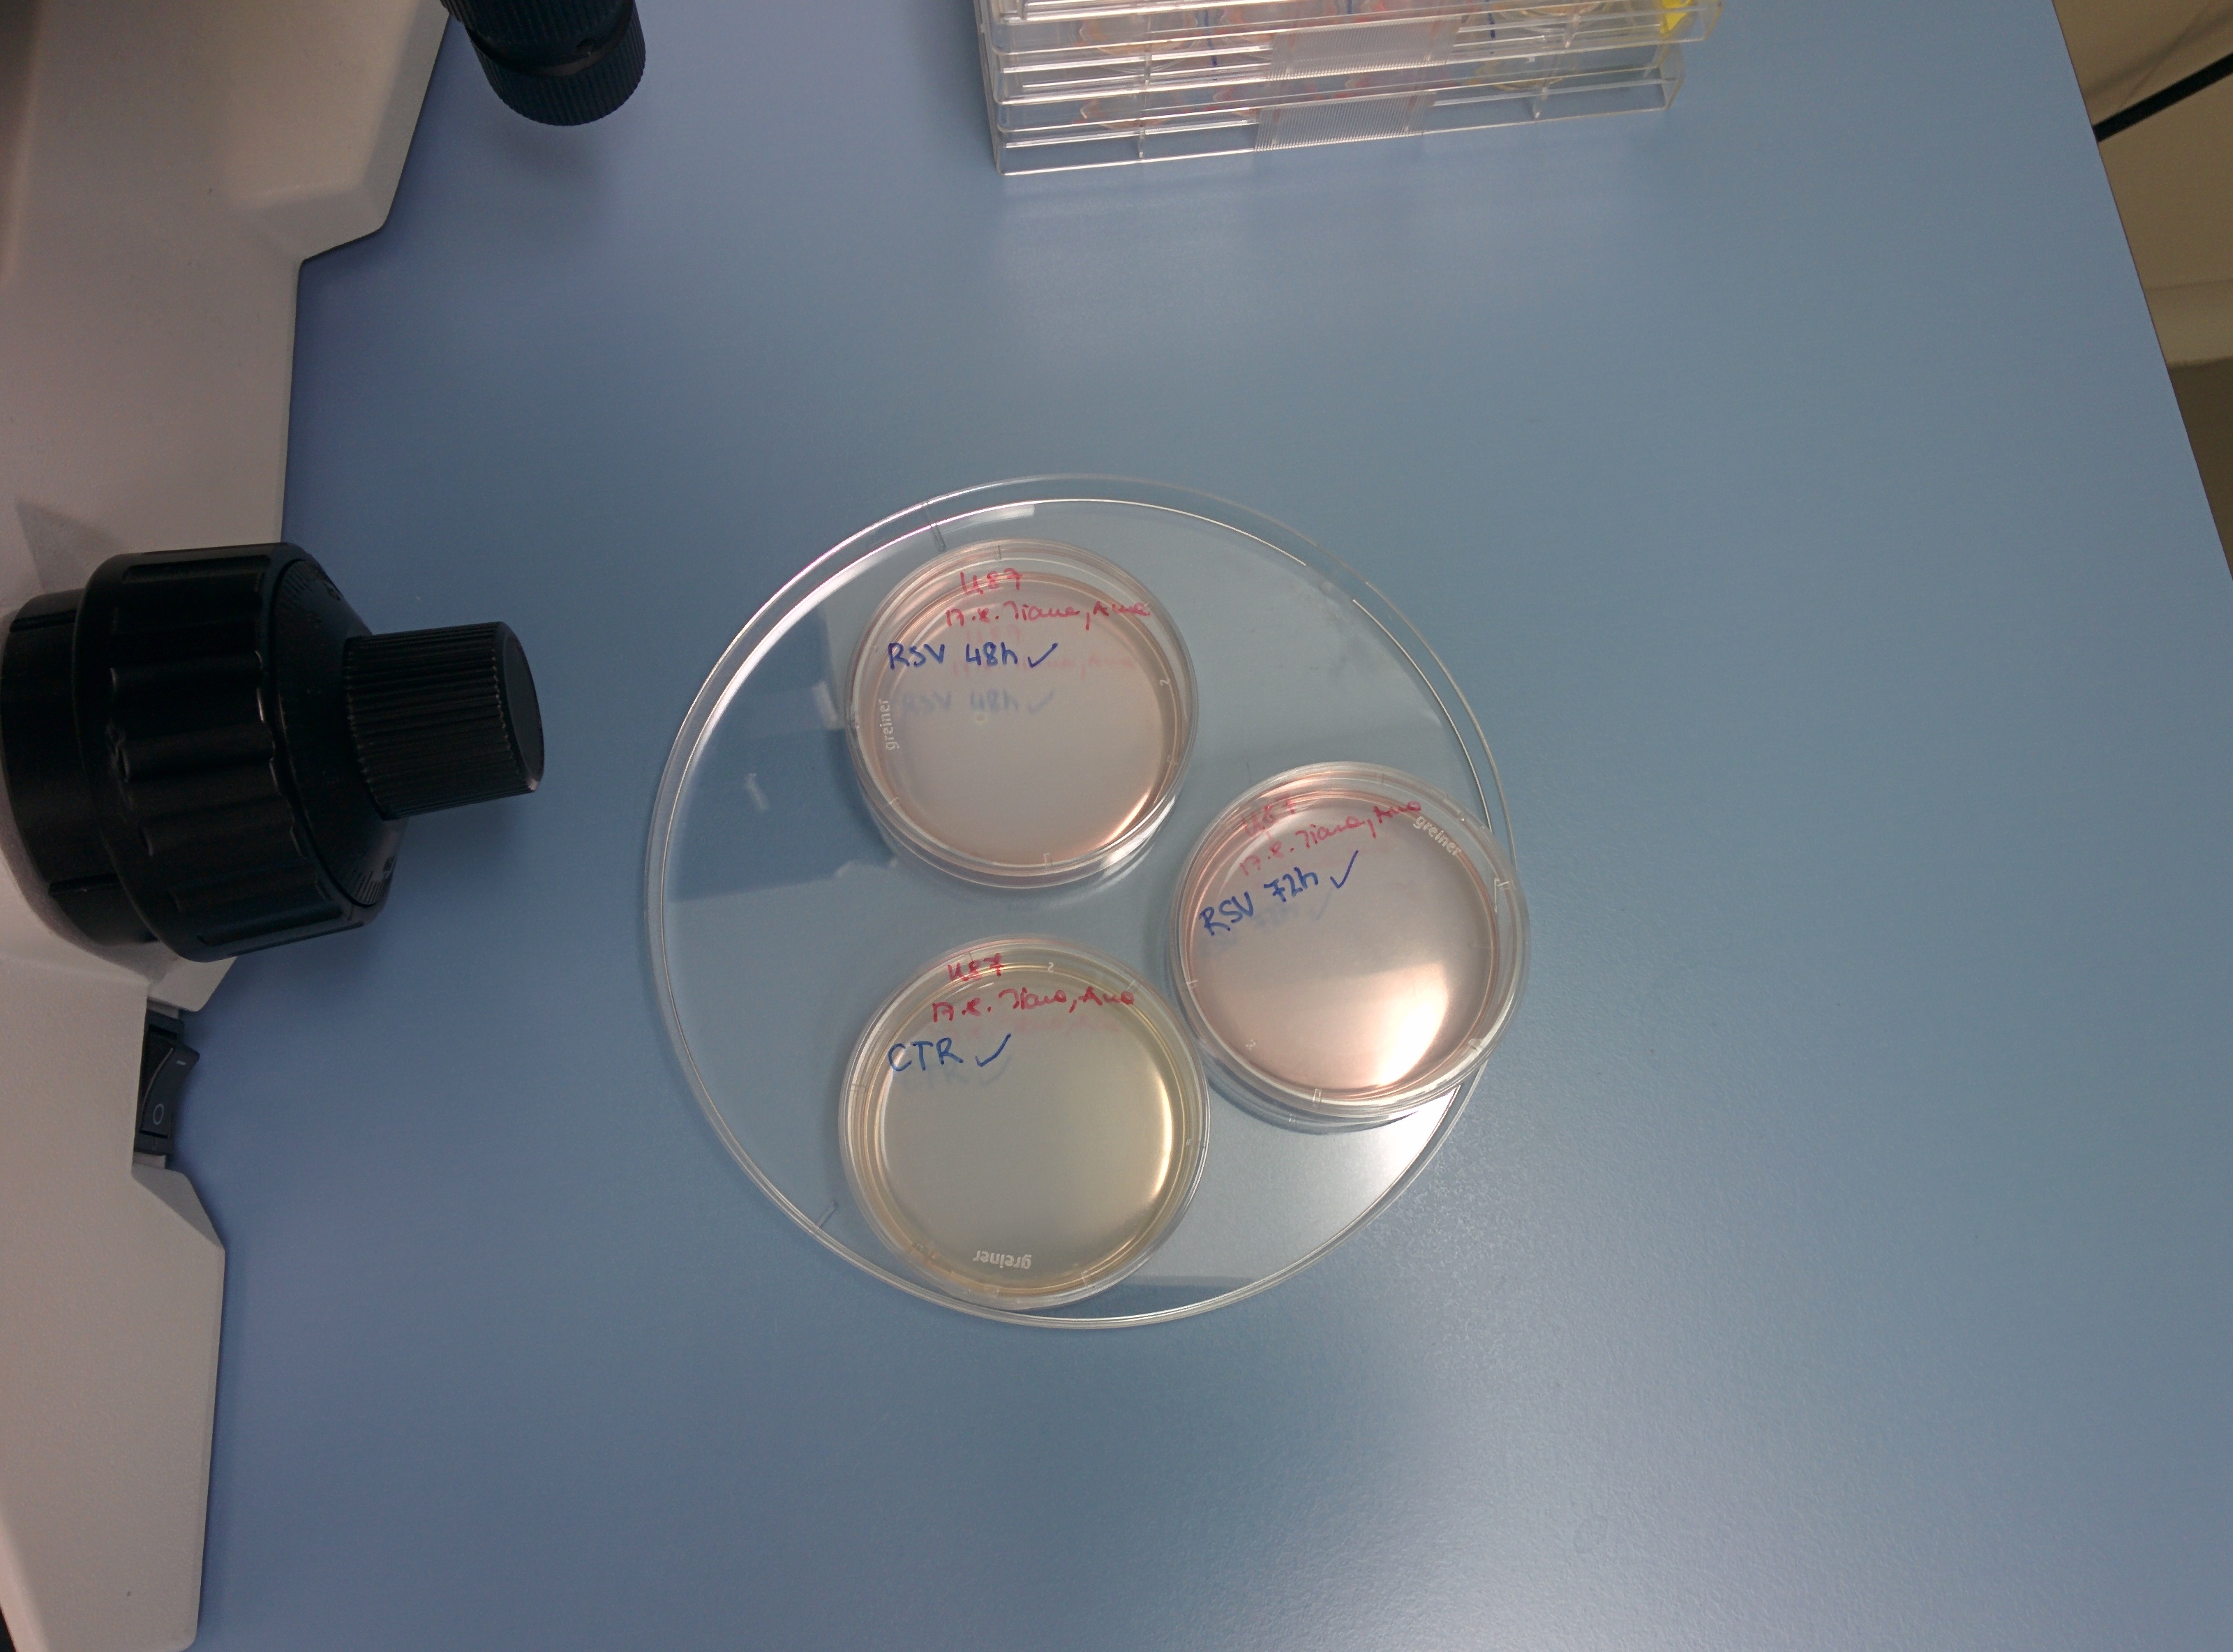 Picture 2: Three petri dishes with U87 cells